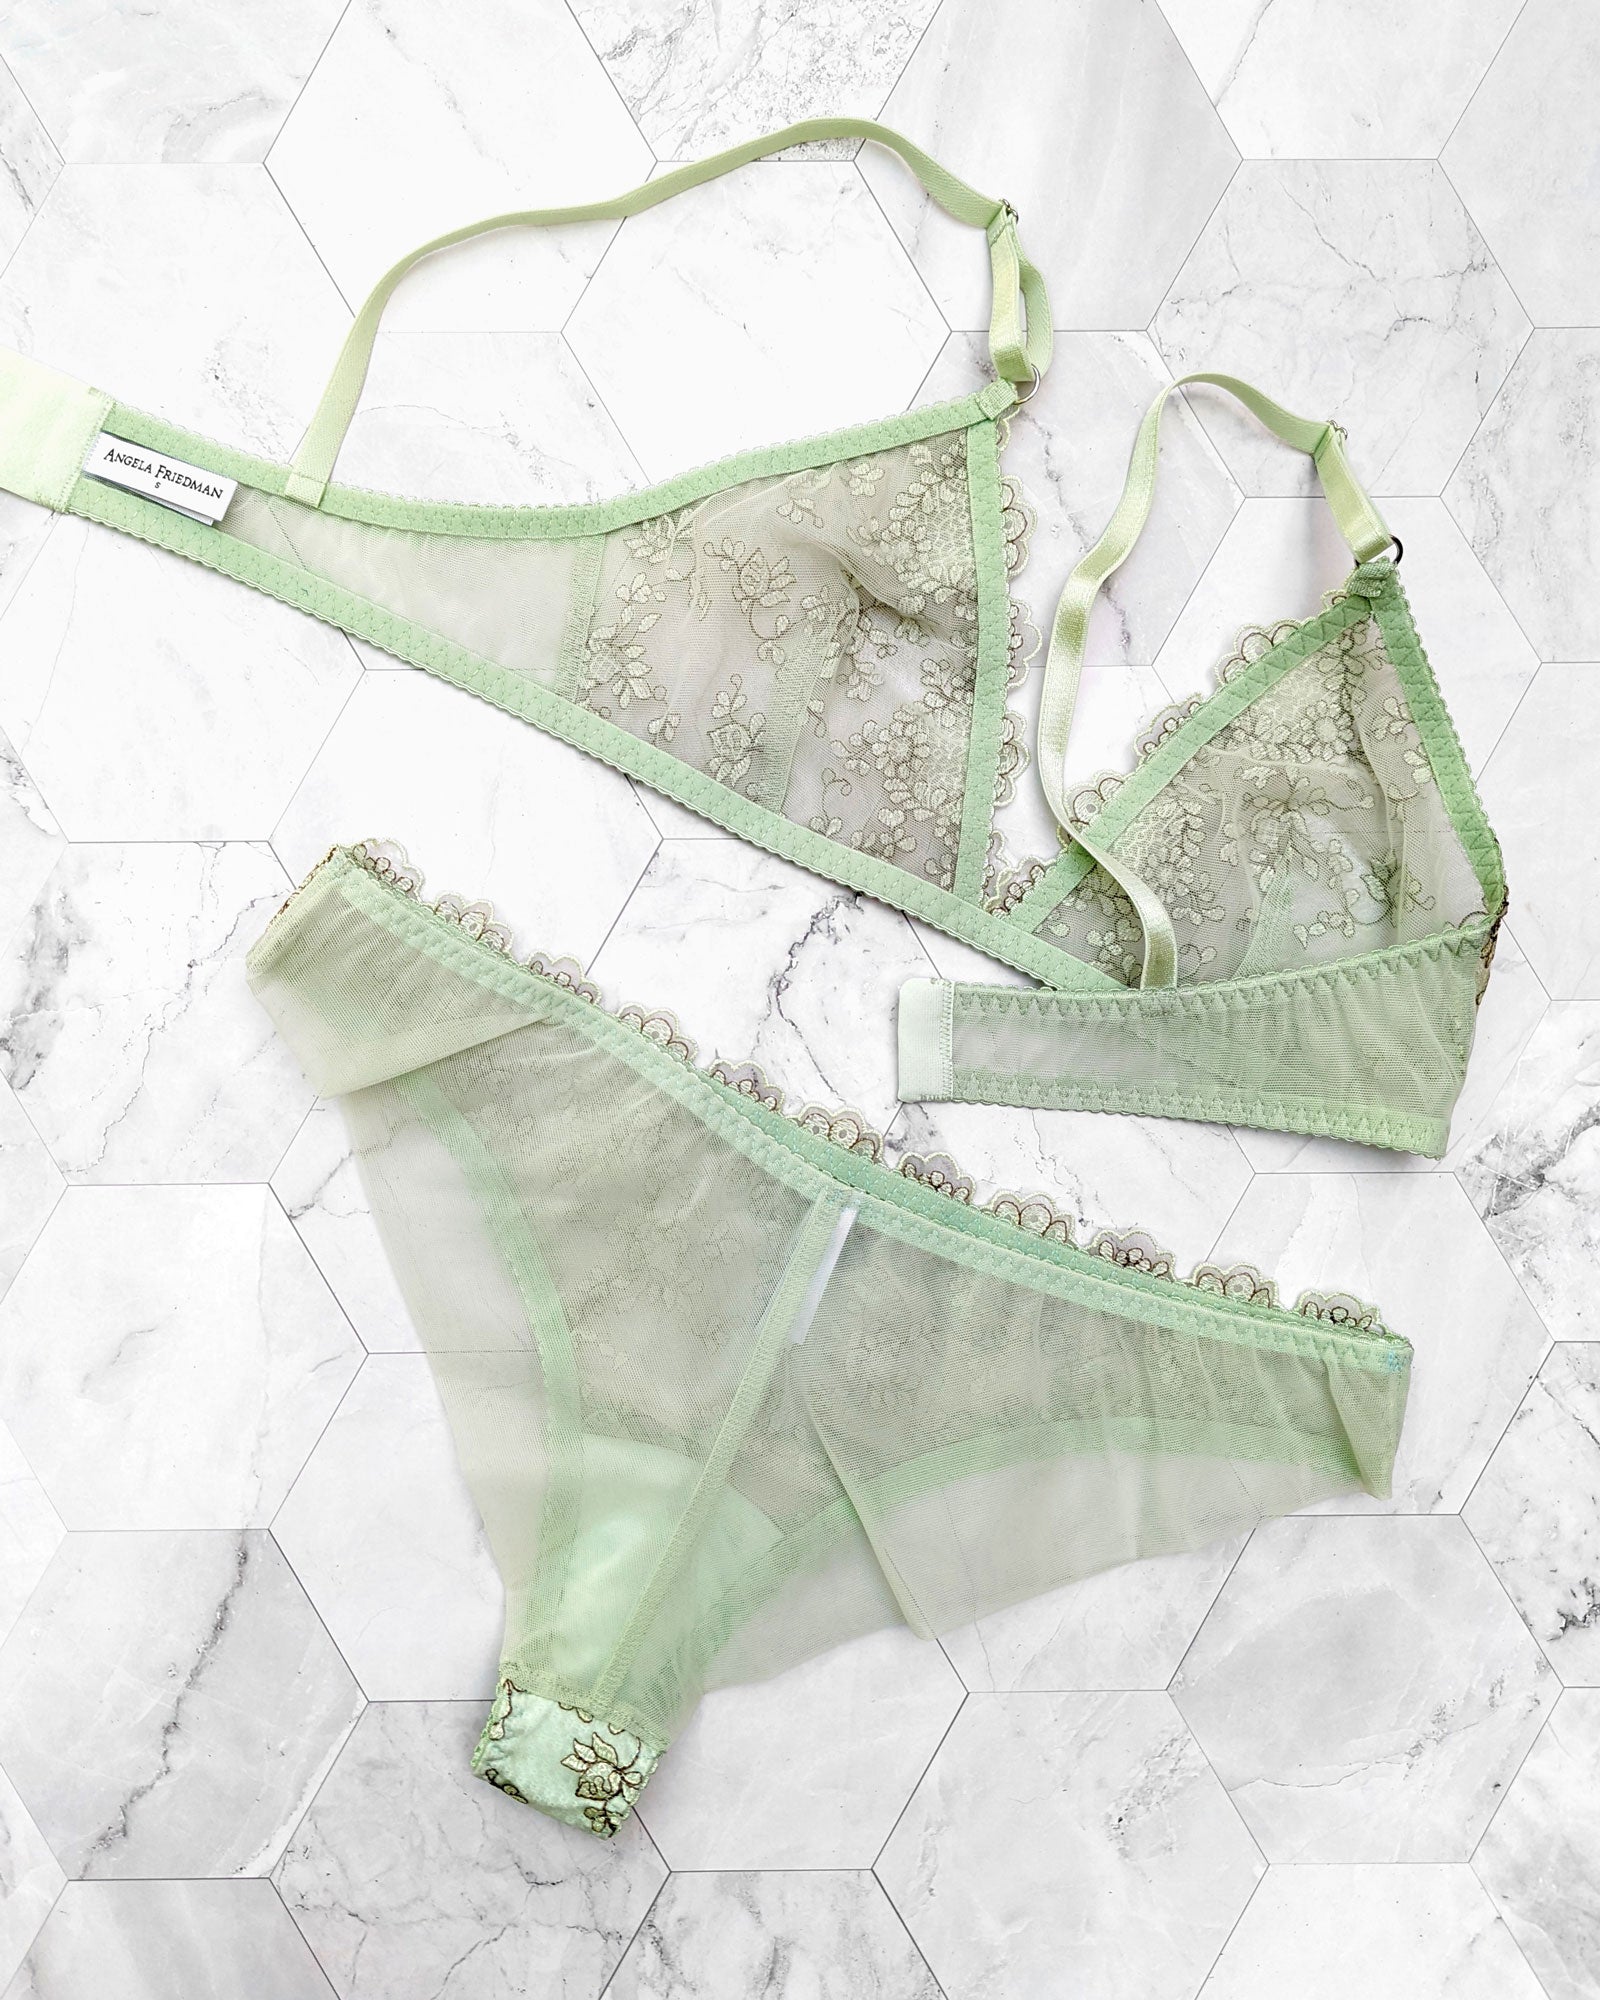 Embroidered mesh lingerie set in pale green with soft stretch mesh and elastics